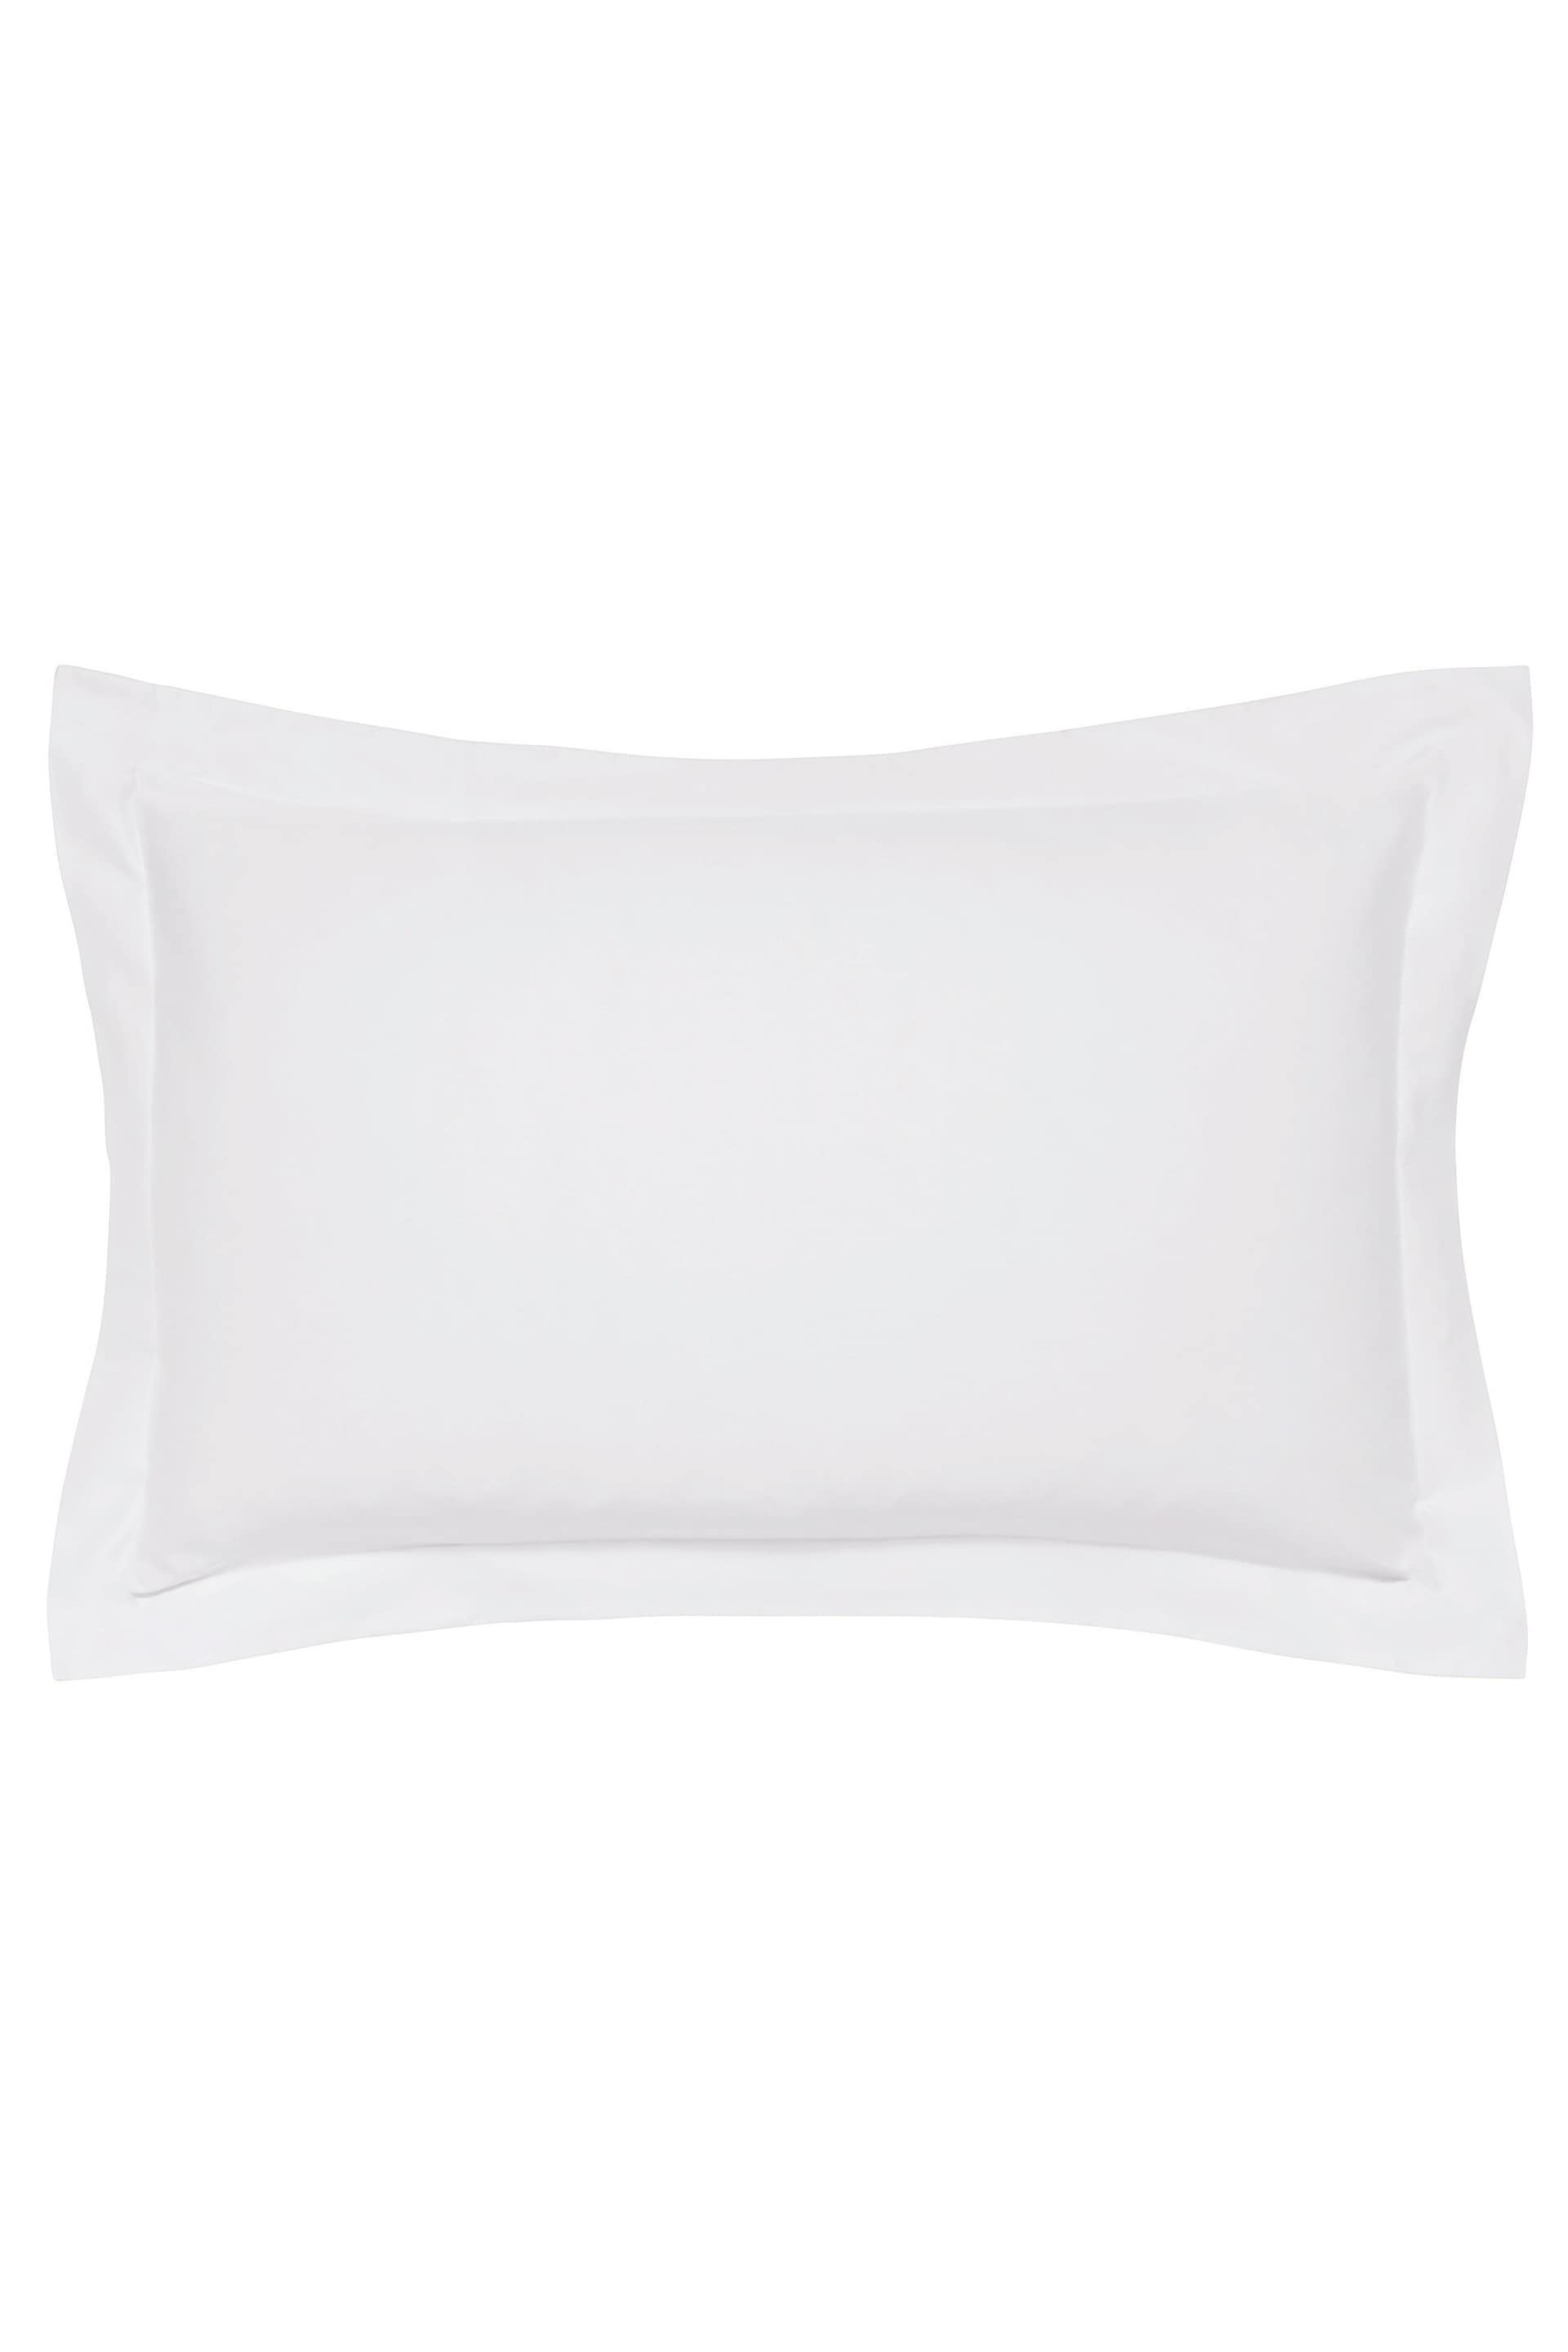 Bedeck Of Belfast Silver 1000 Thread Count Egyptian Cotton Sateen Oxford Pillowcase - Image 2 of 3